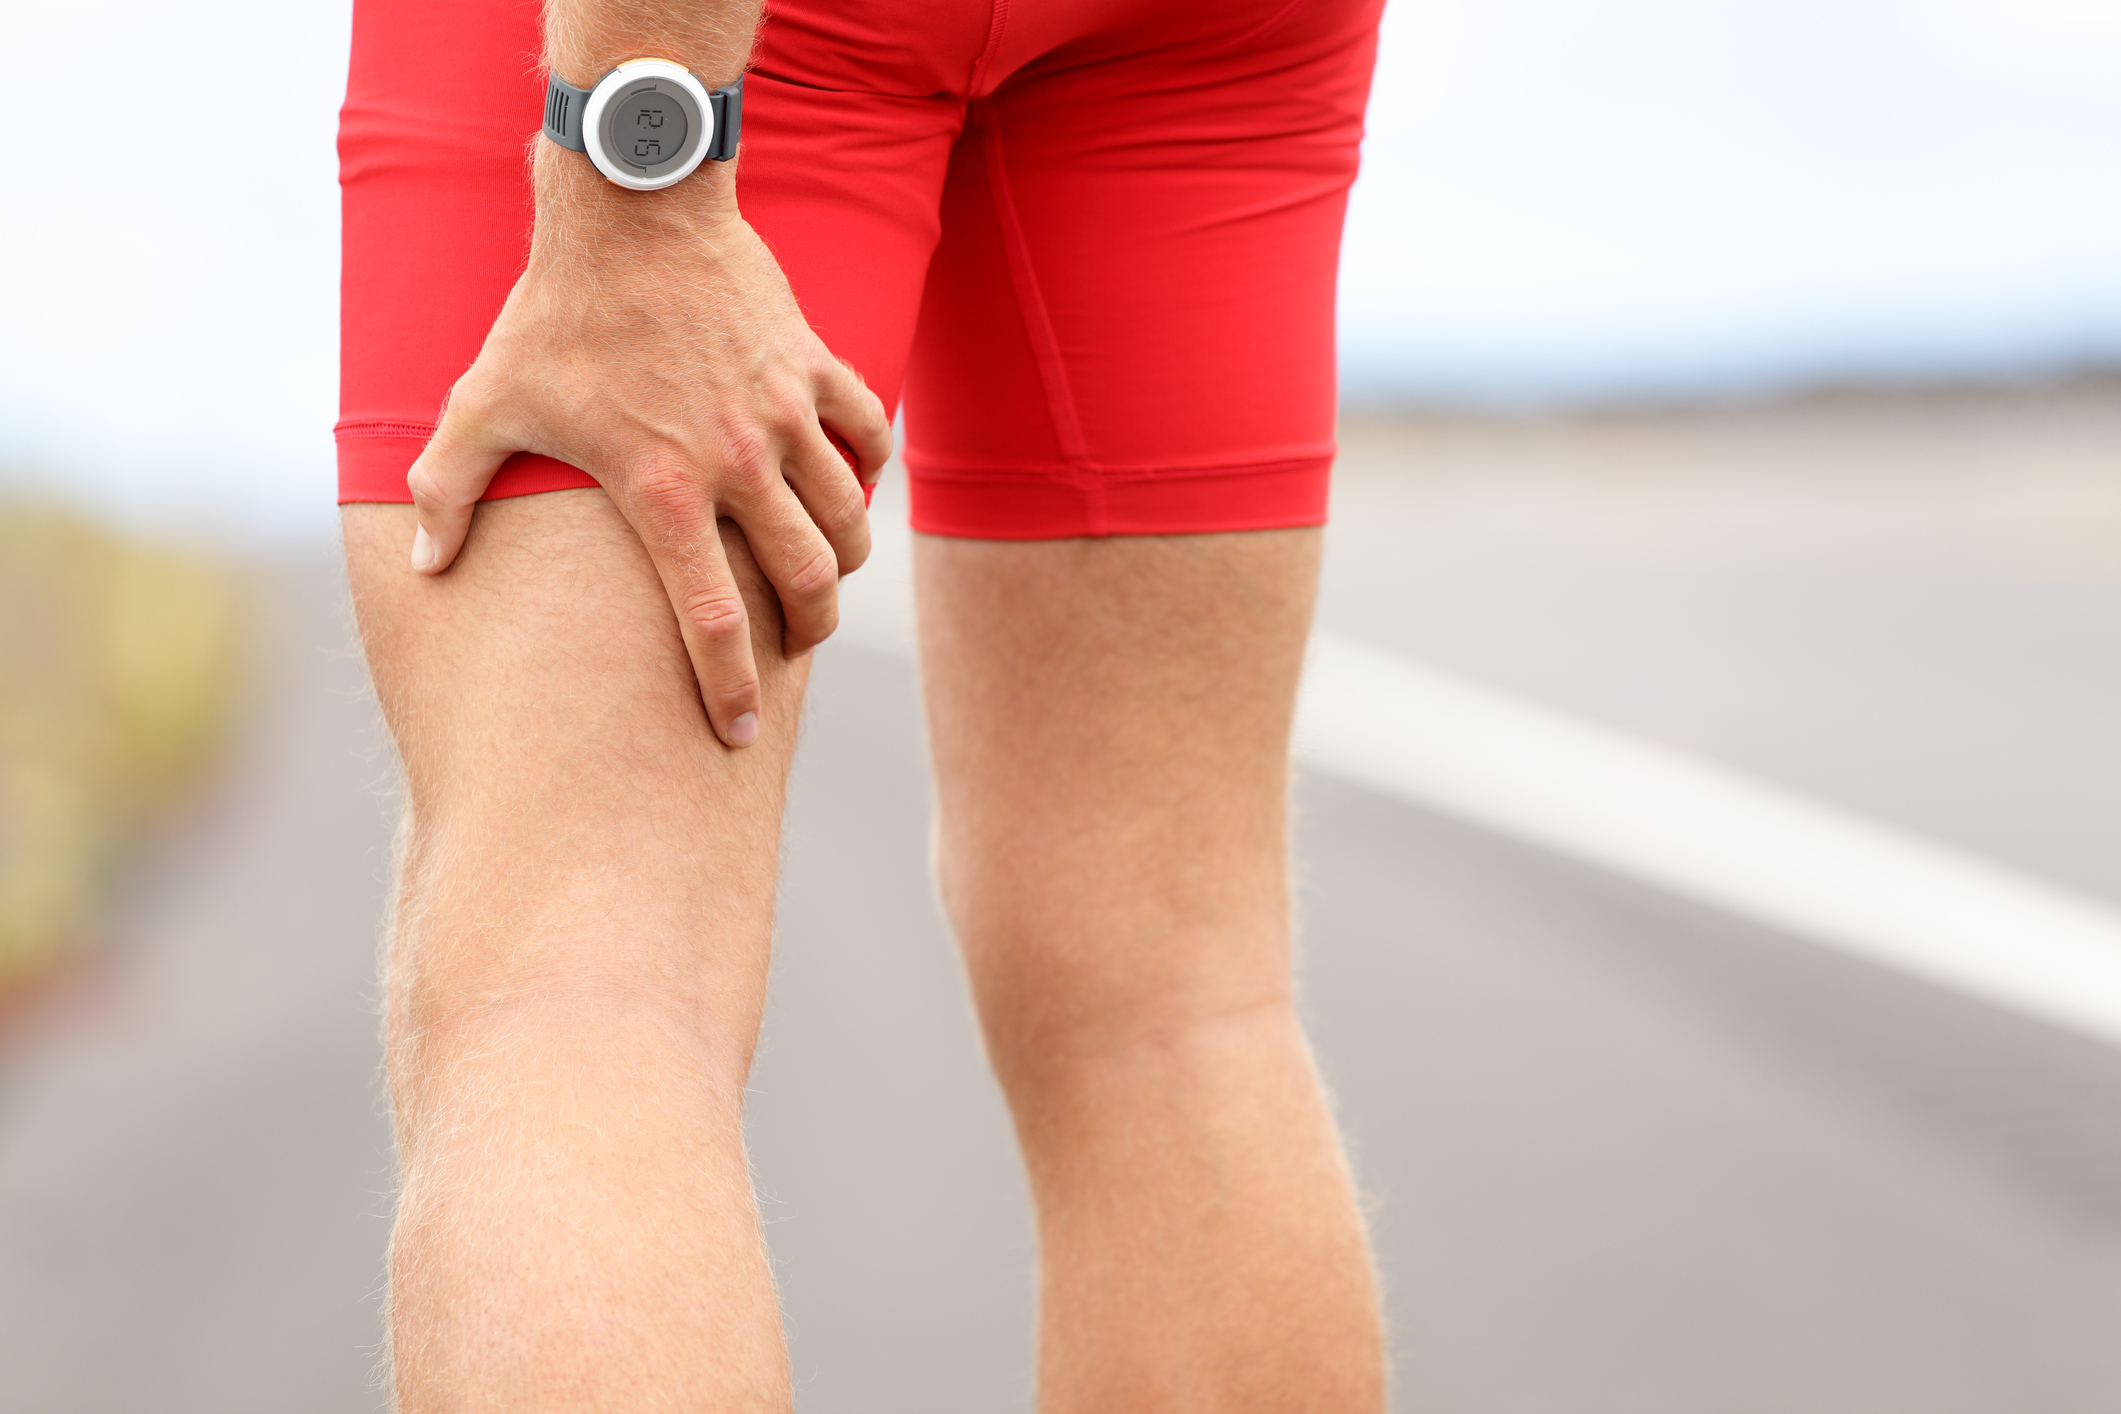 Got a muscle injury that needs healing fast? Avoid this